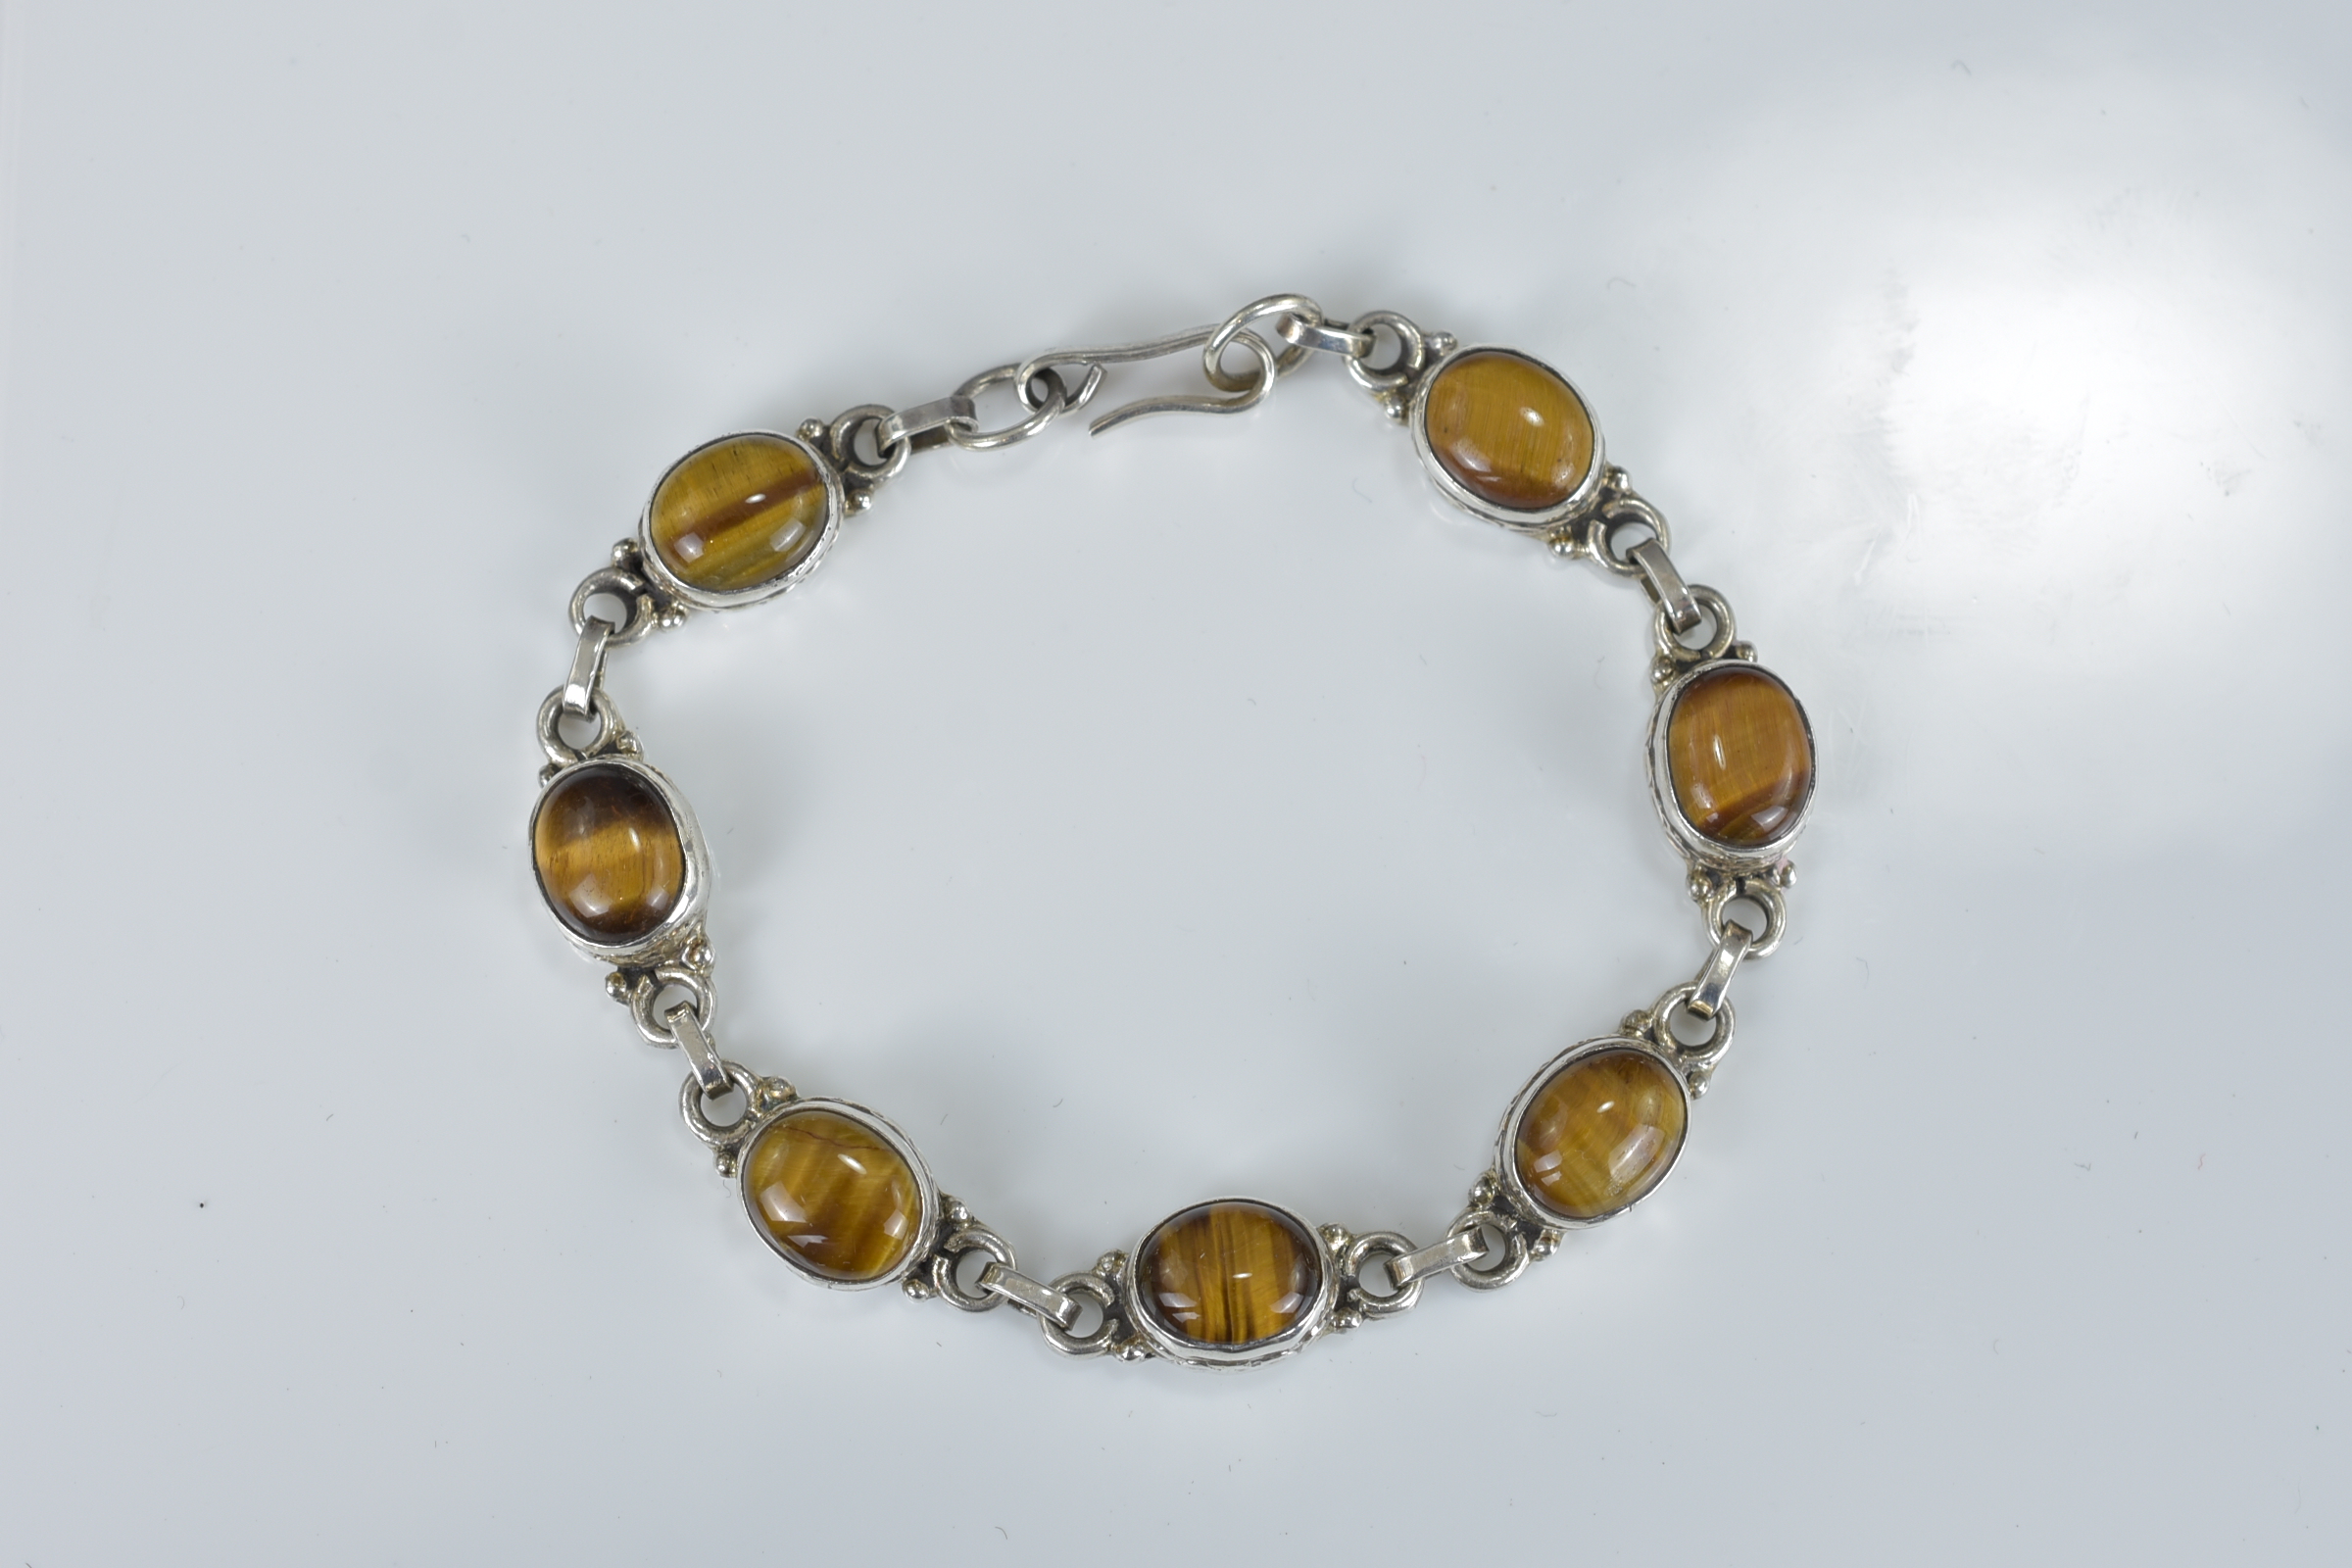 A Baltic amber and mother of pearl bracelet together with a silver charm bracelet with eight charms, - Image 4 of 4